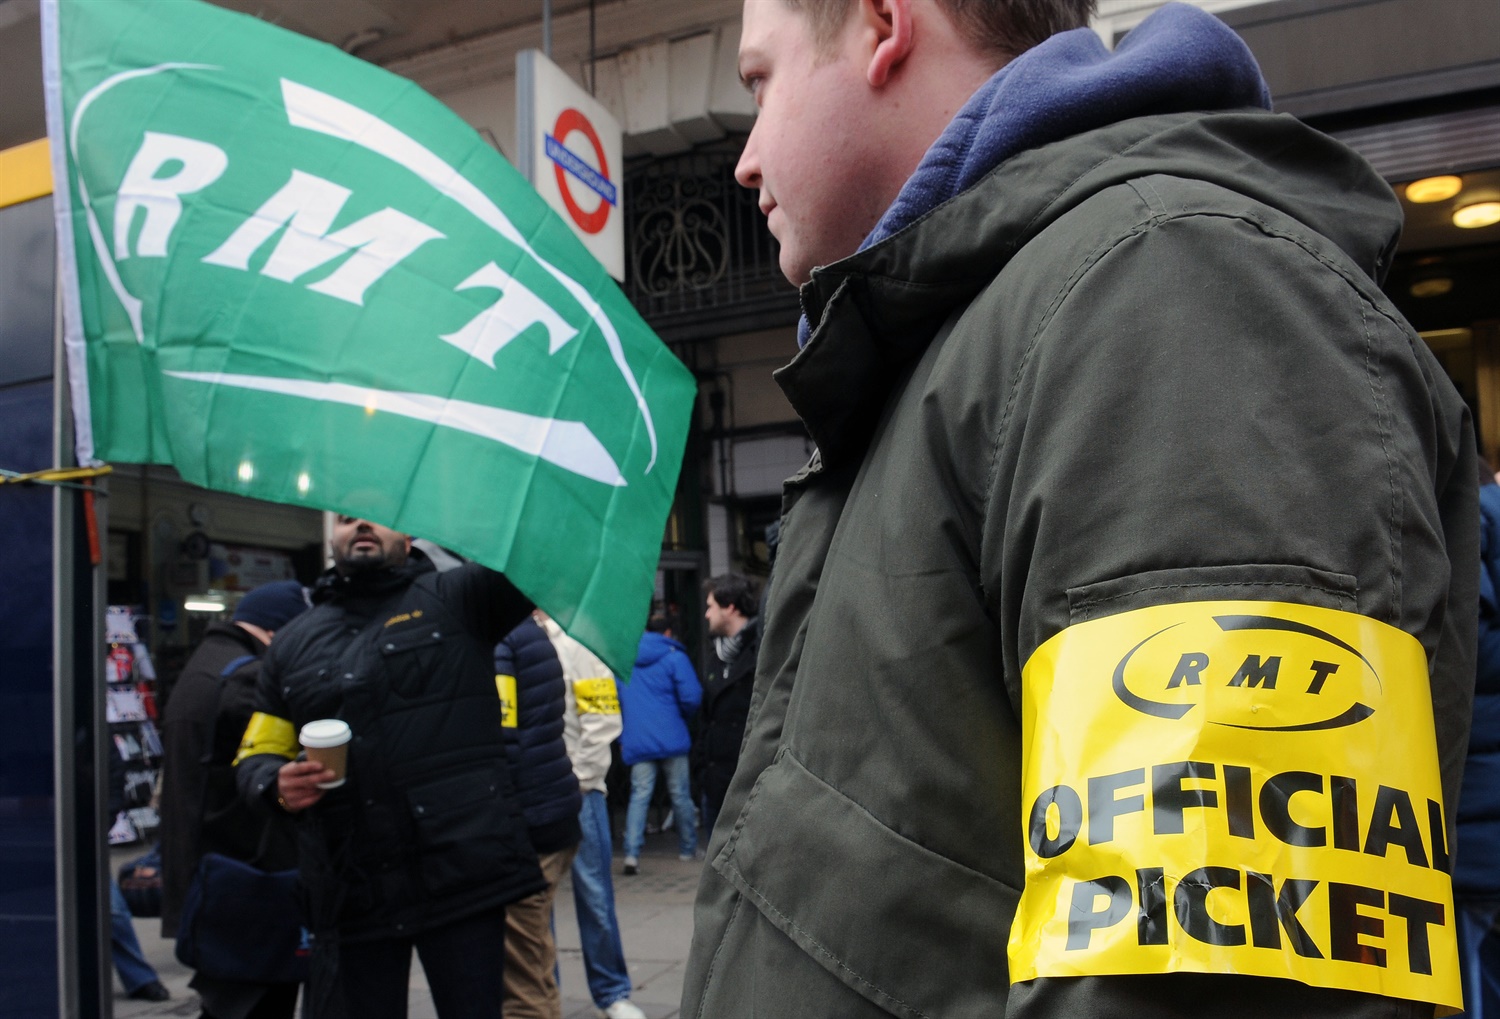 More reduced services for passengers in RMT walkout as guard debate rolls on